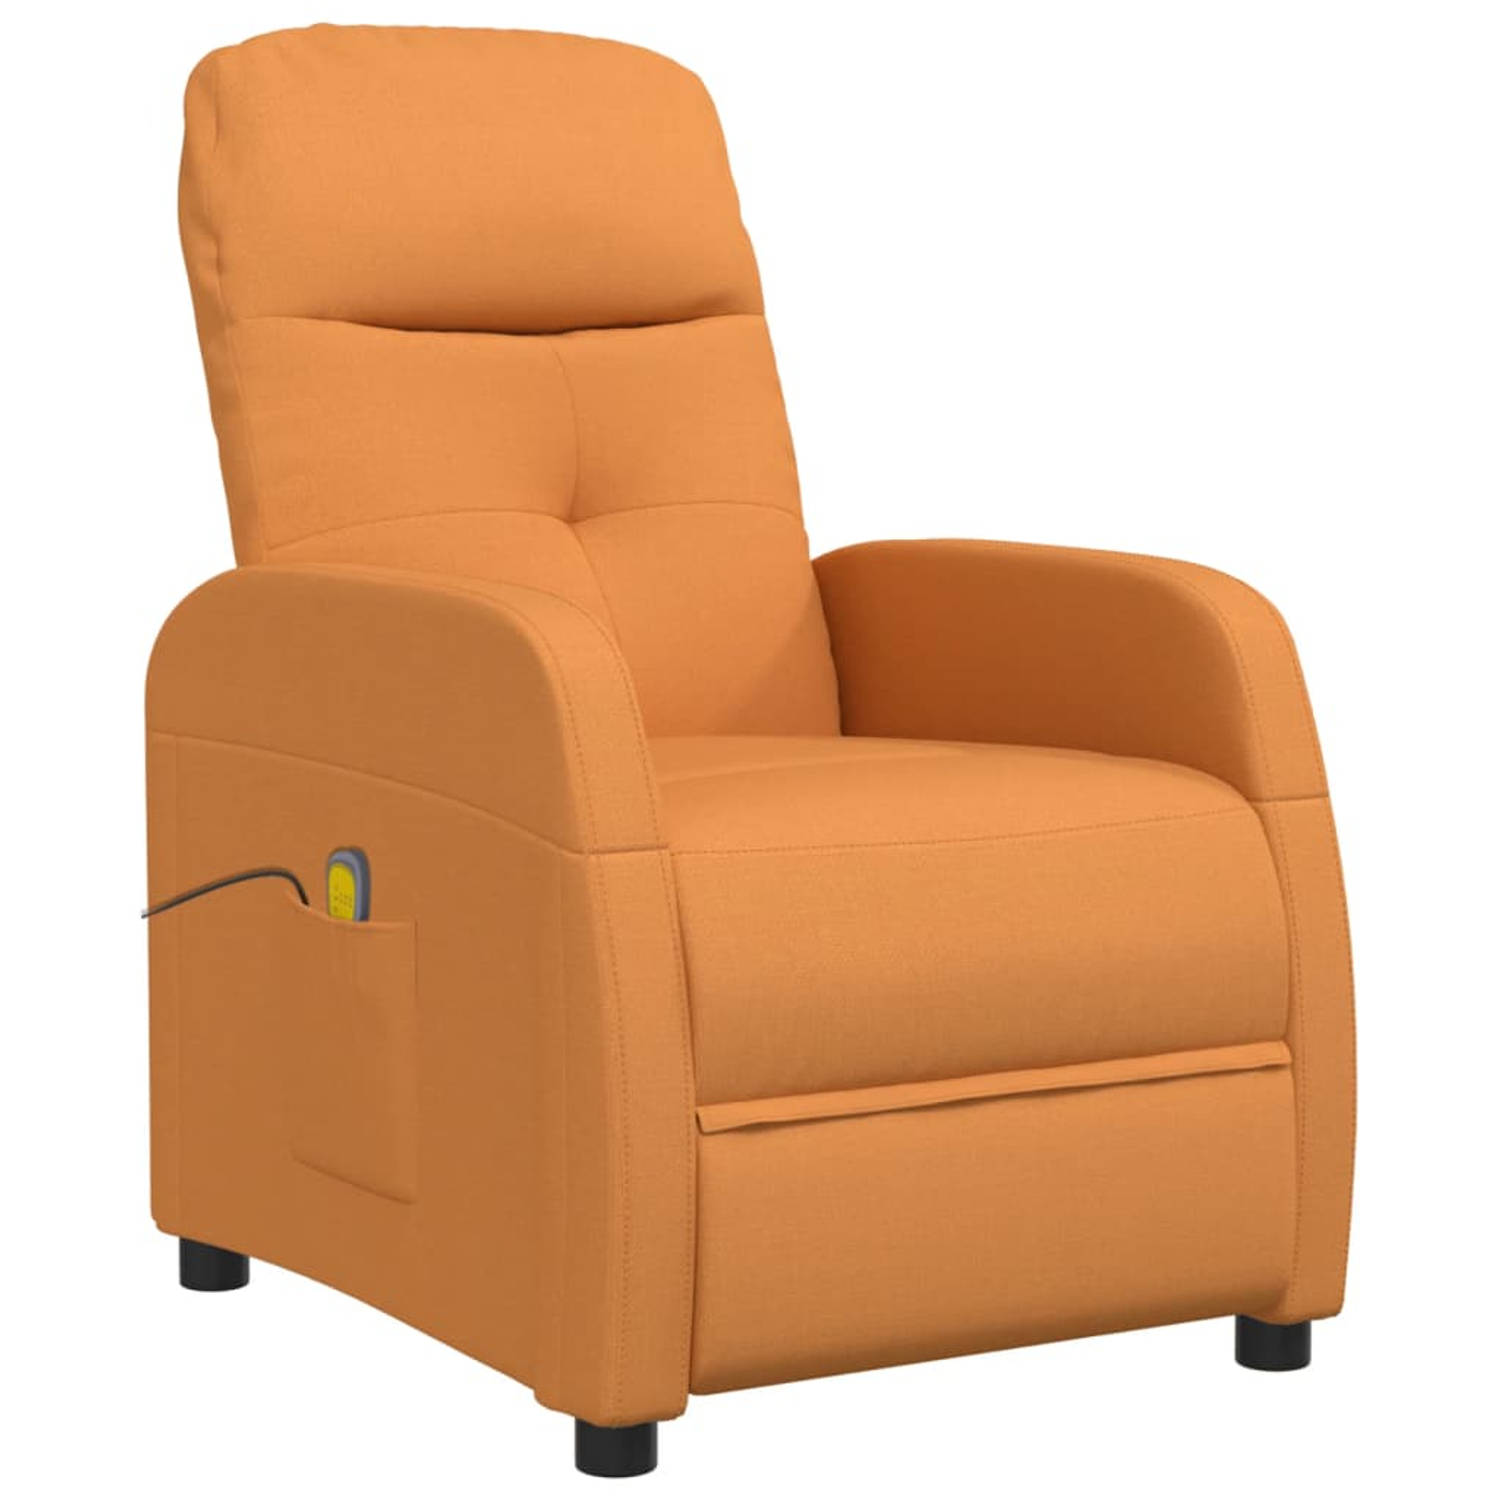 The Living Store Massagestoel stof donkergeel - Fauteuil